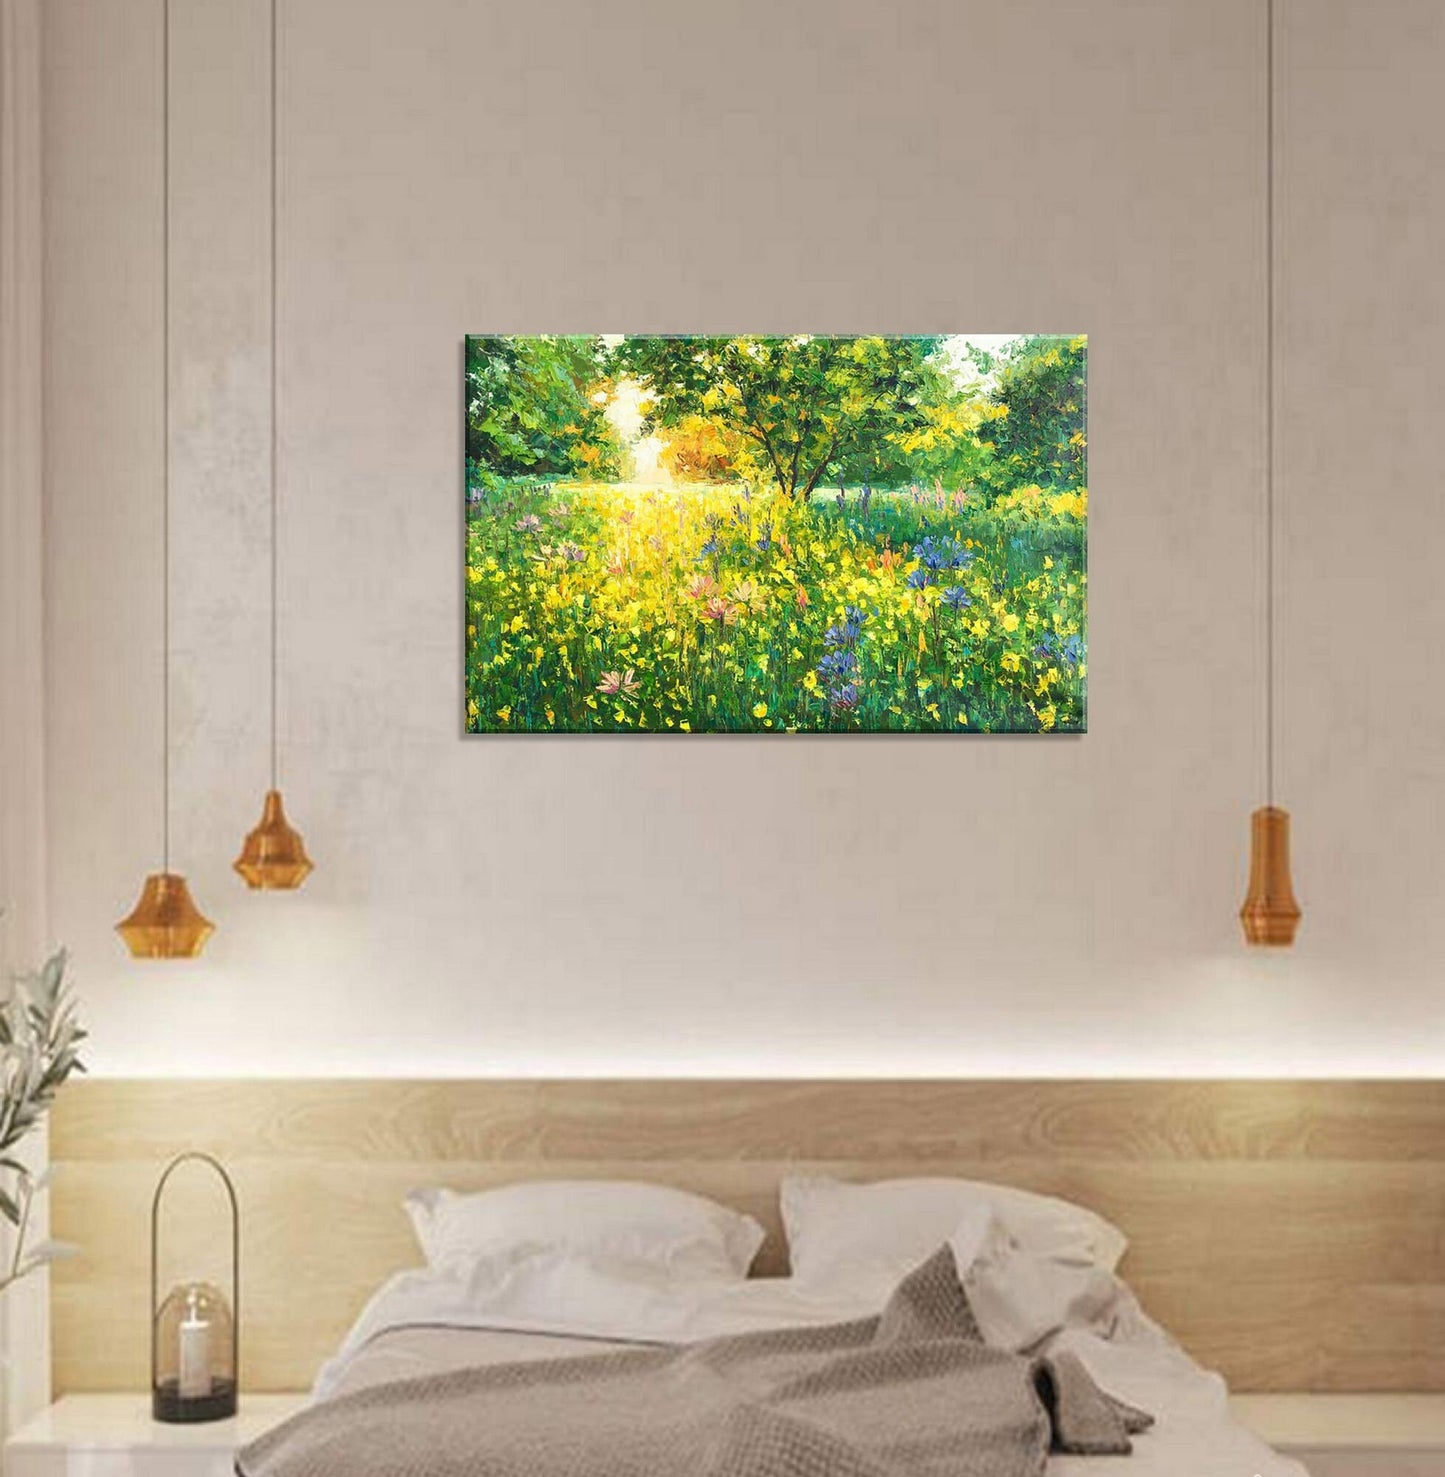 Upgrade your home decor with this unique palette knife painting of Spring Forest Green- A true masterpiece